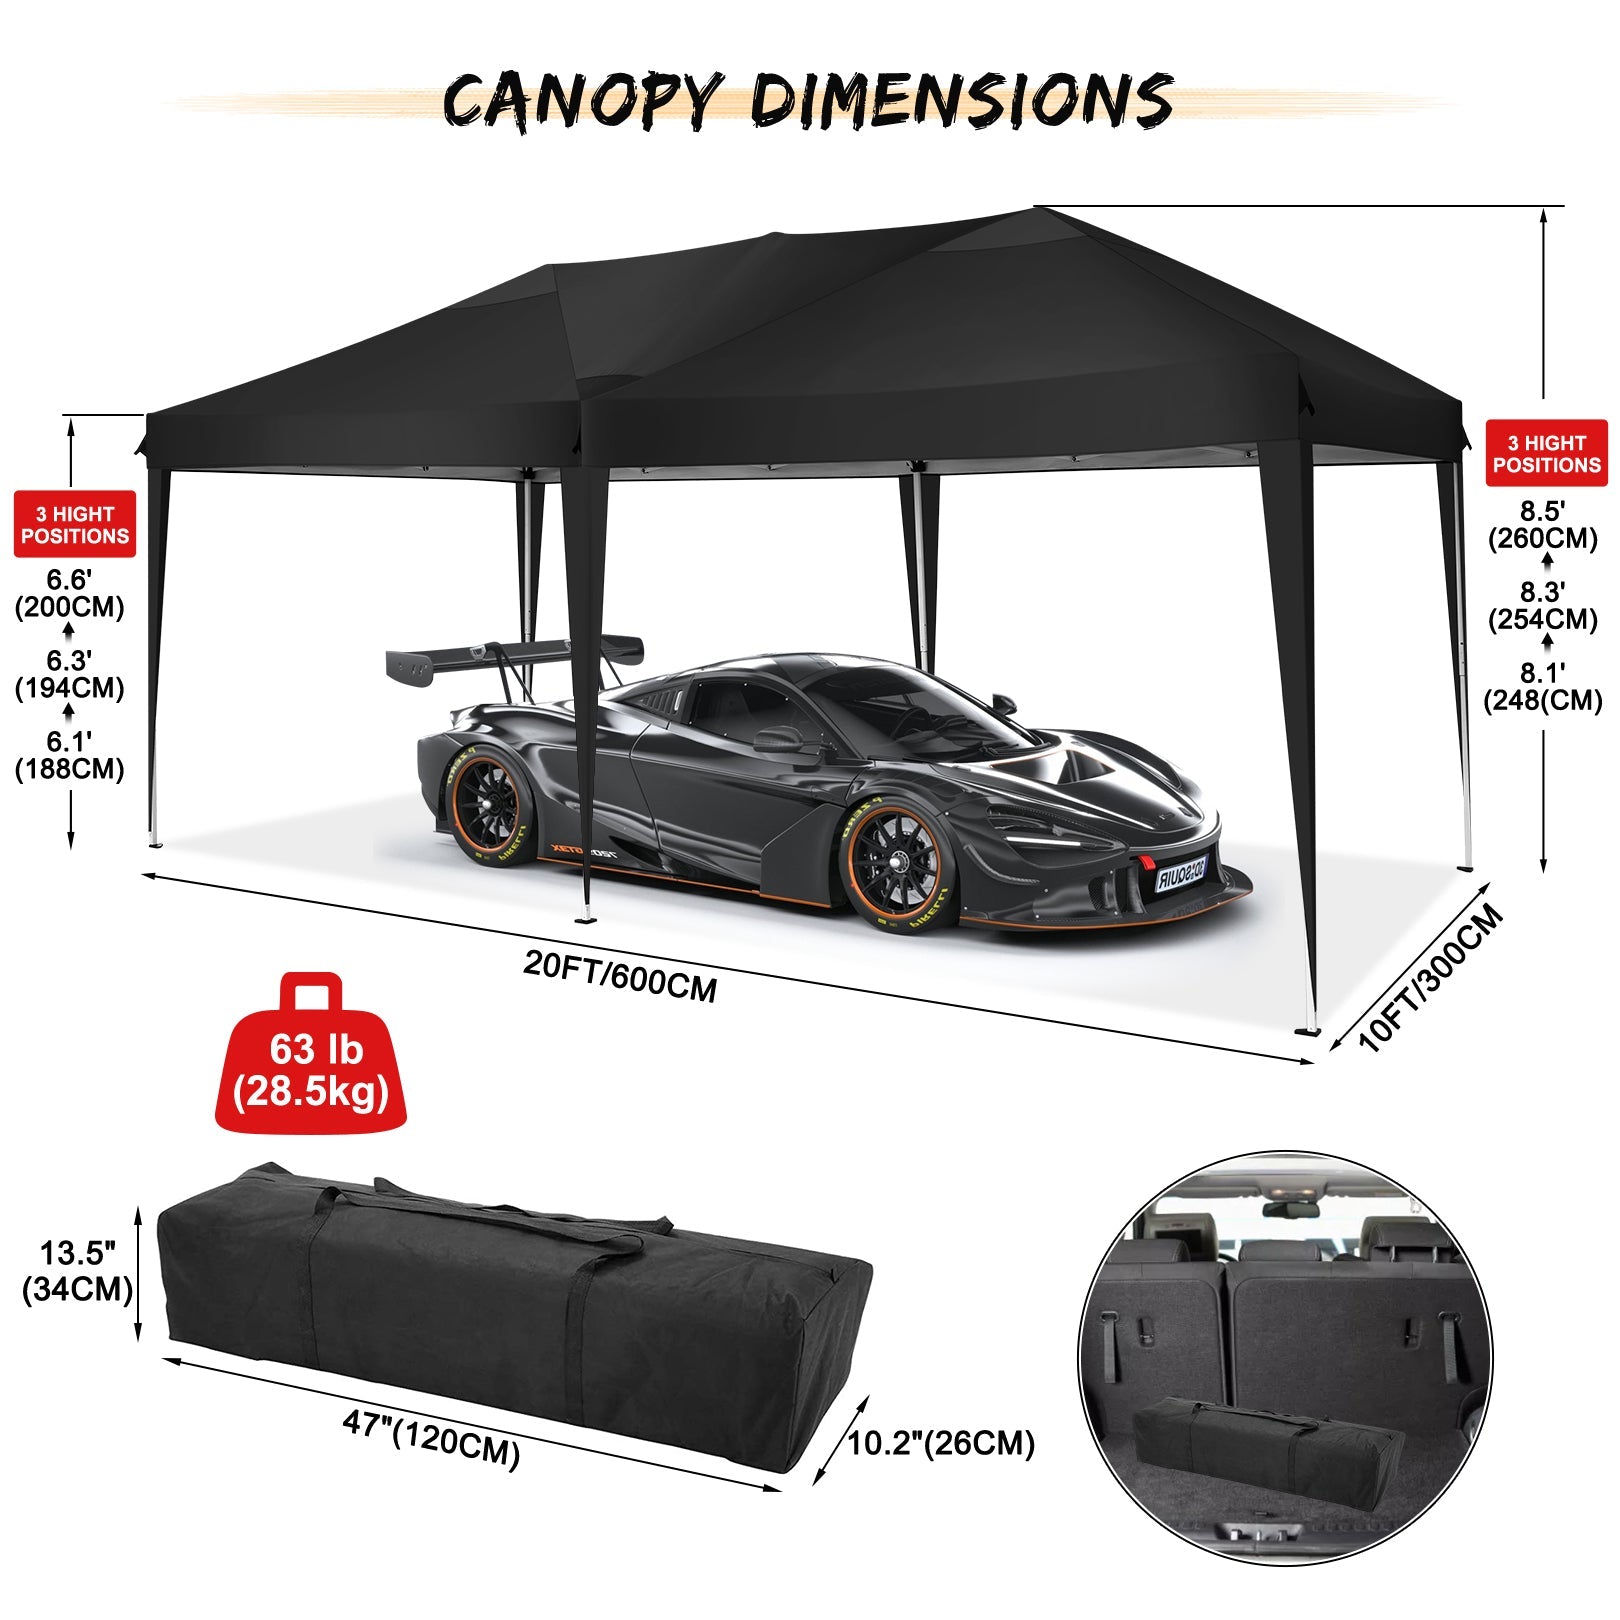 10' x 20' Outdoor Canopy Tent EZ Pop Up Backyard Canopy Portable Party Commercial Instant Canopy Shelter Tent Gazebo with 6 Removable Sidewalls & Carrying Bag for Wedding Picnics Camping, Black